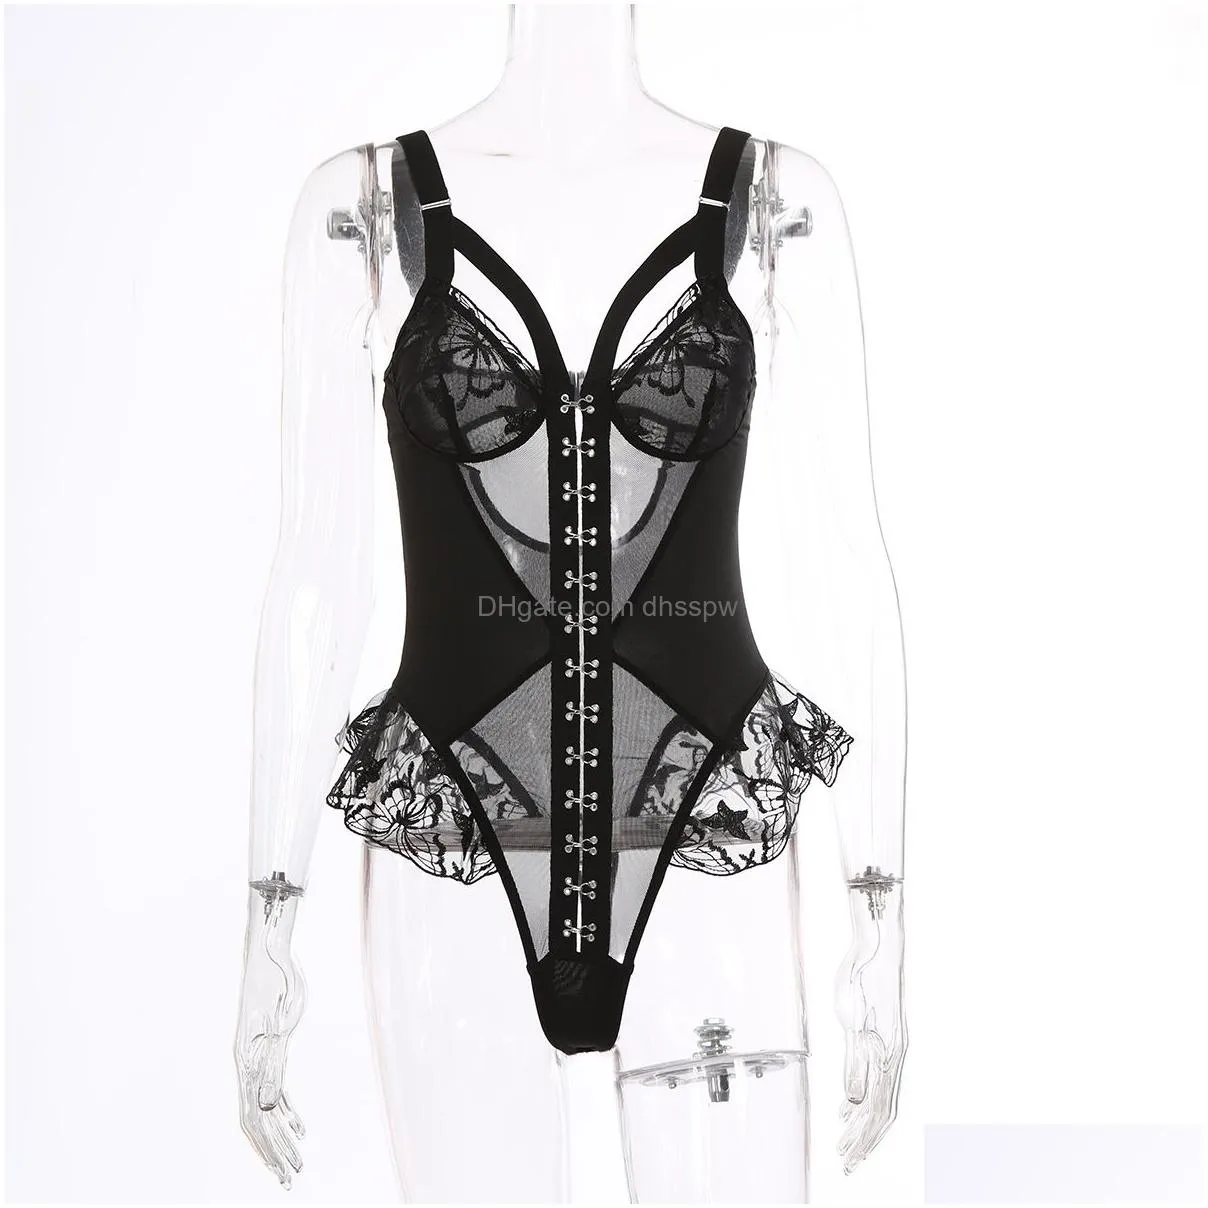 Sexy Lace Lace Bustier Bodysuit Teddy Lingerie For Women Large Breasts,  Pajama Stockings Drop Delivery From Dhsspw, $12.28